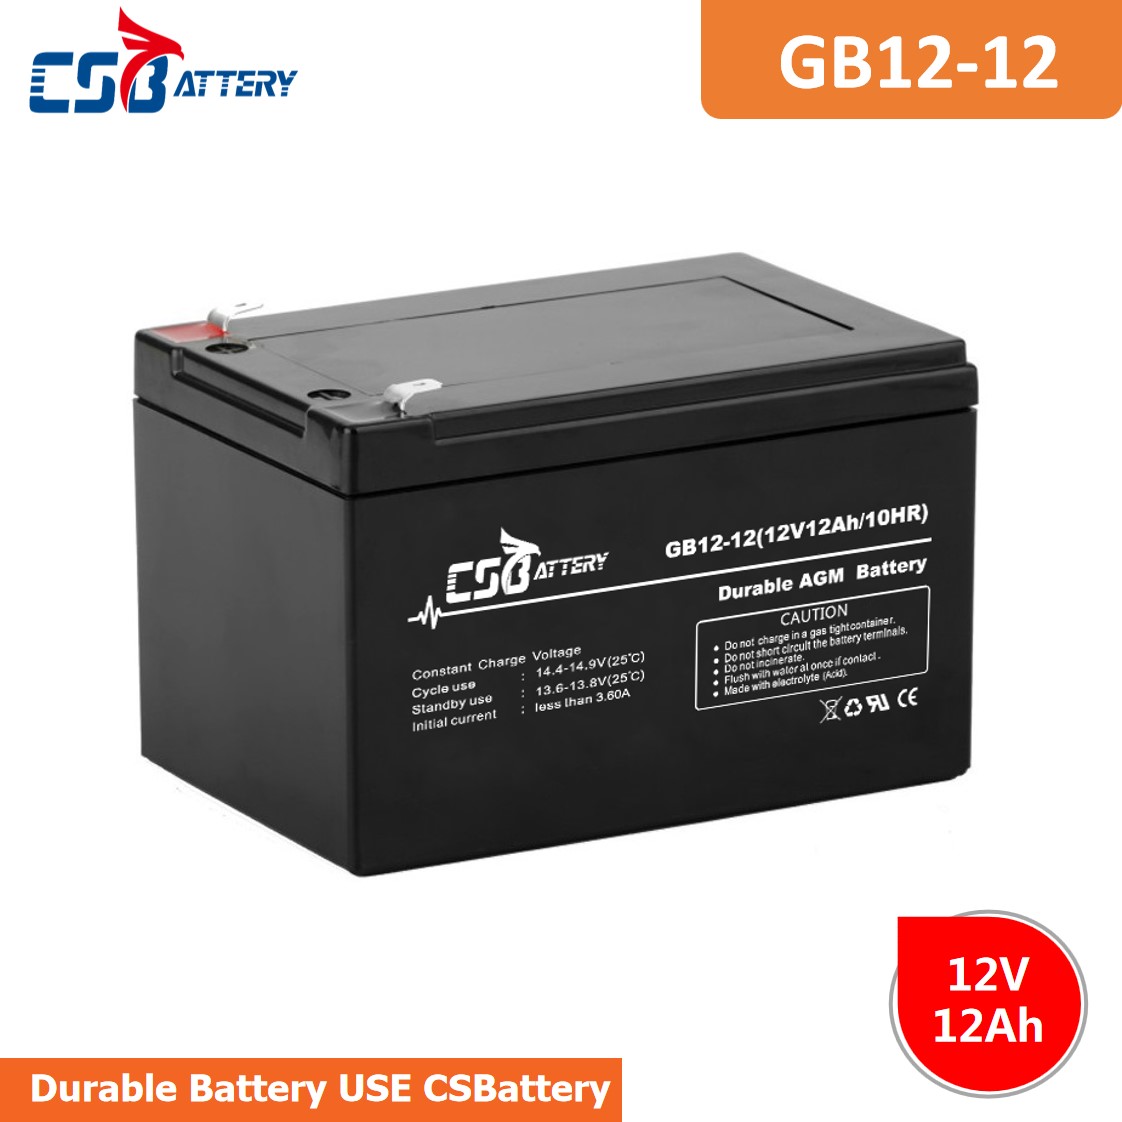 CSBattery 12V 12Ah SMF-rechargeable  Lead acid battery for Home-Appliances/Electric-Vehicle/Solar-Panel/power-tools 							